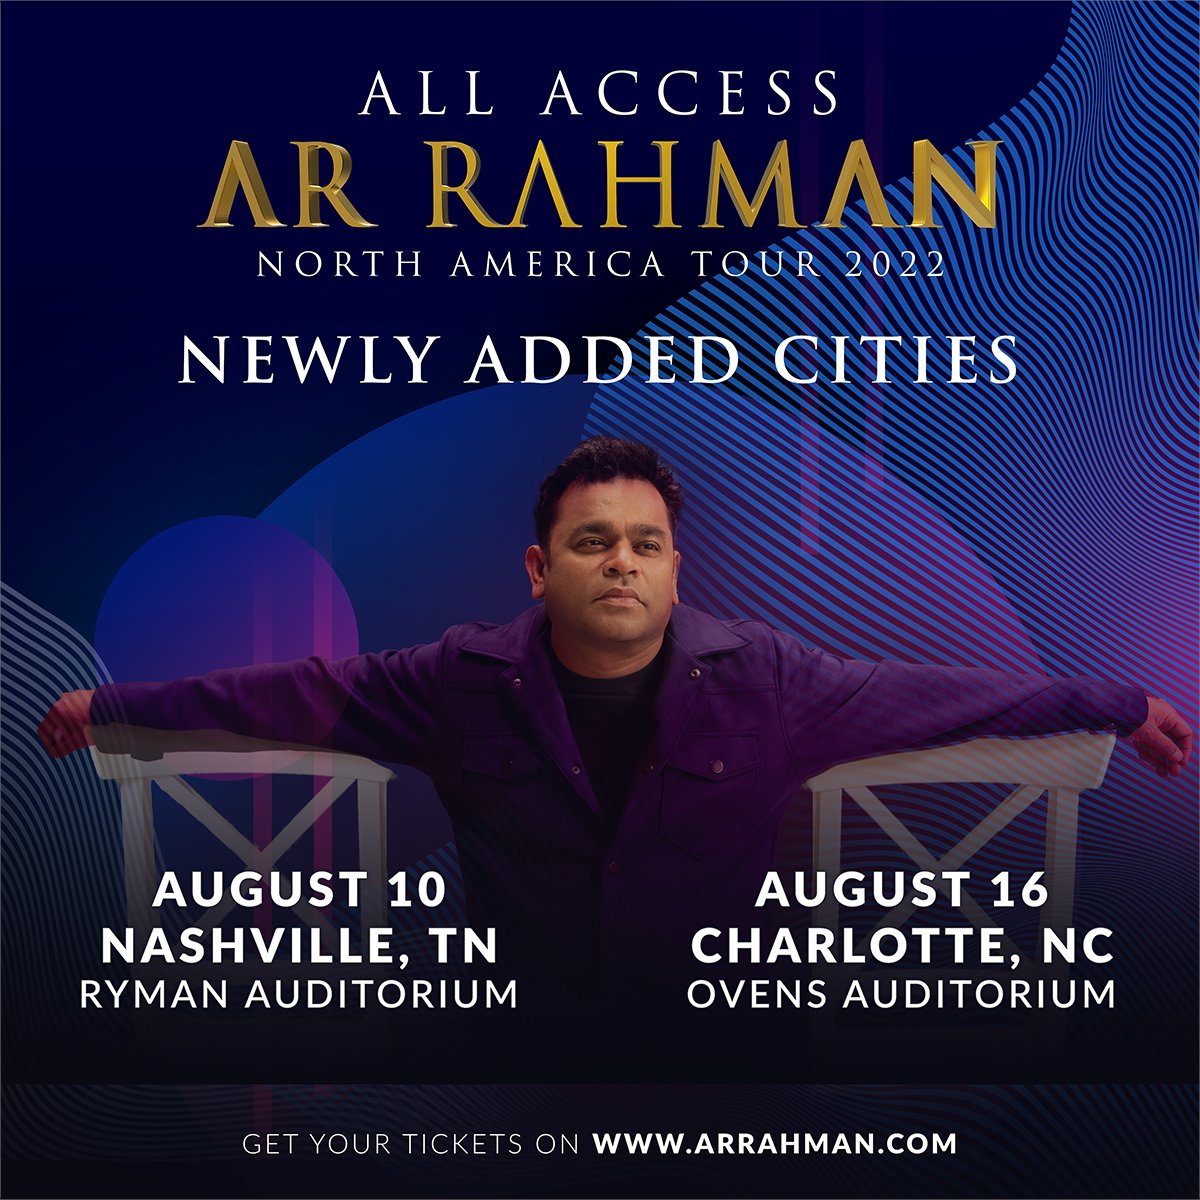 Friends in North America! New cities added!
Welcoming Nashville and Charlotte to the routing plan!
For tickets, log on to arrahman.com
#arrahman #arrahmanlive #allaccessarrahman #northamericatour #healingworld #EPI